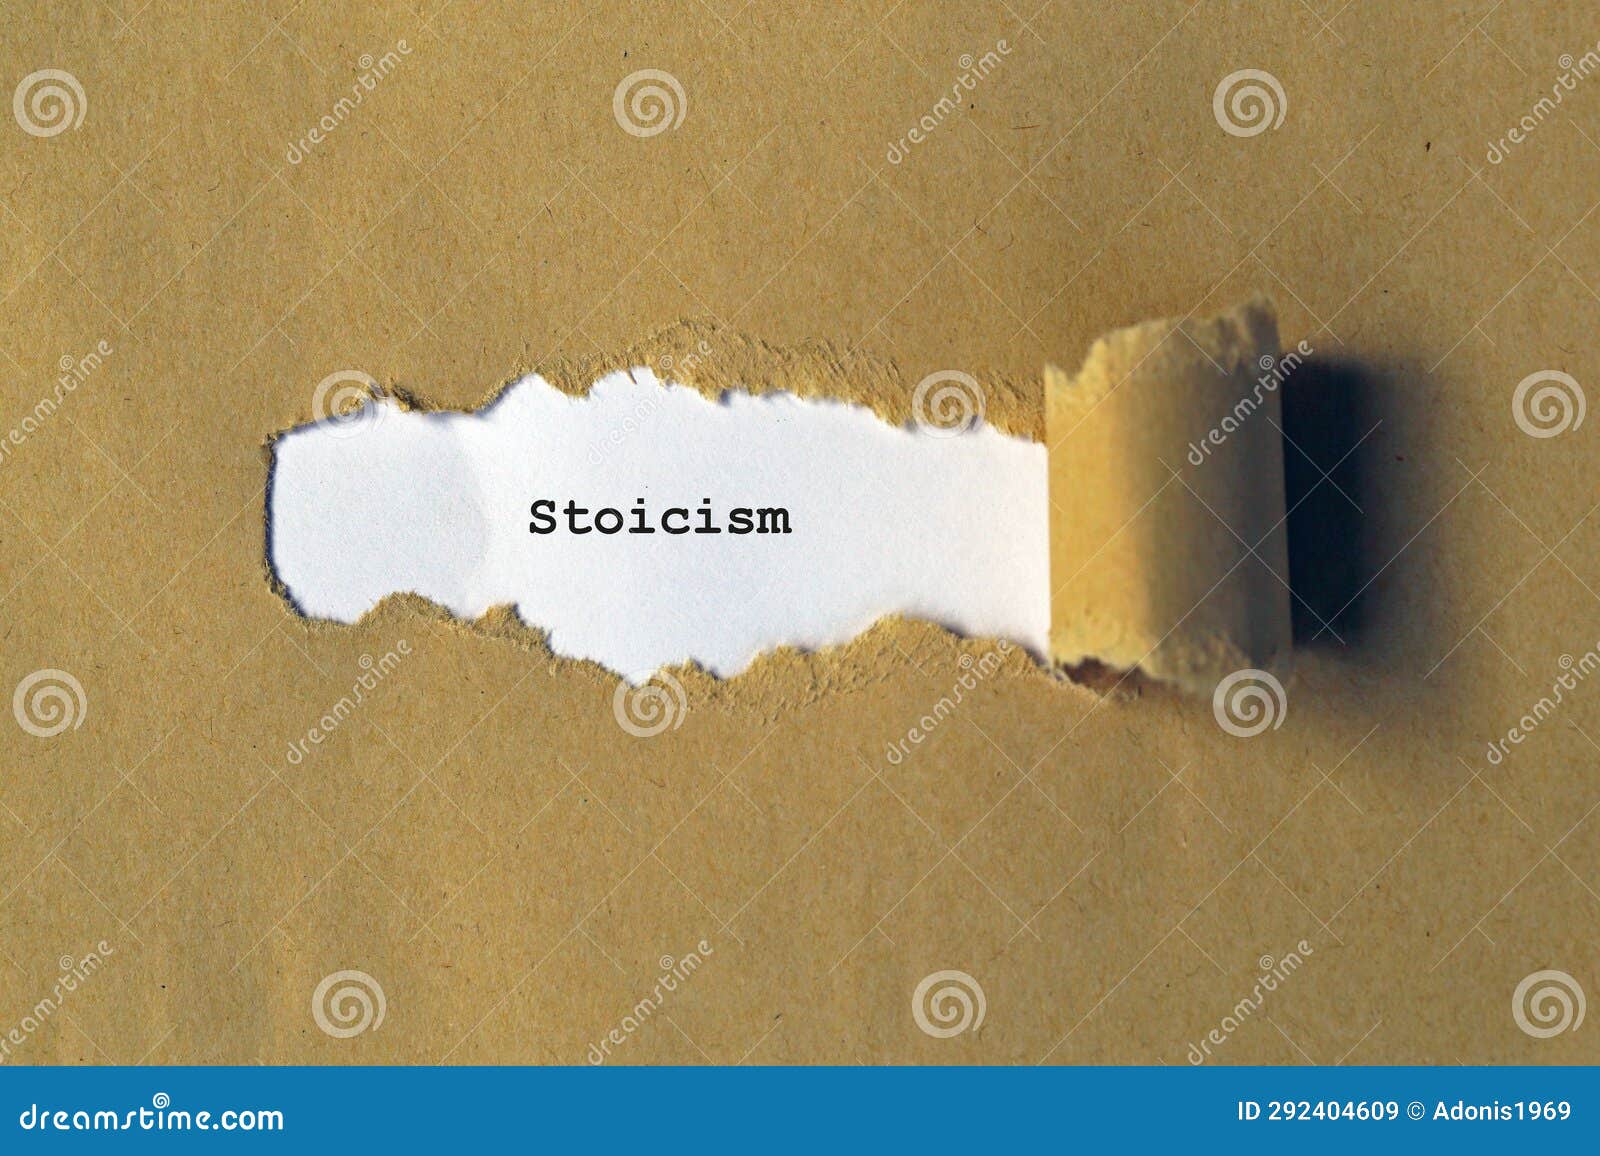 stoicism on white paper